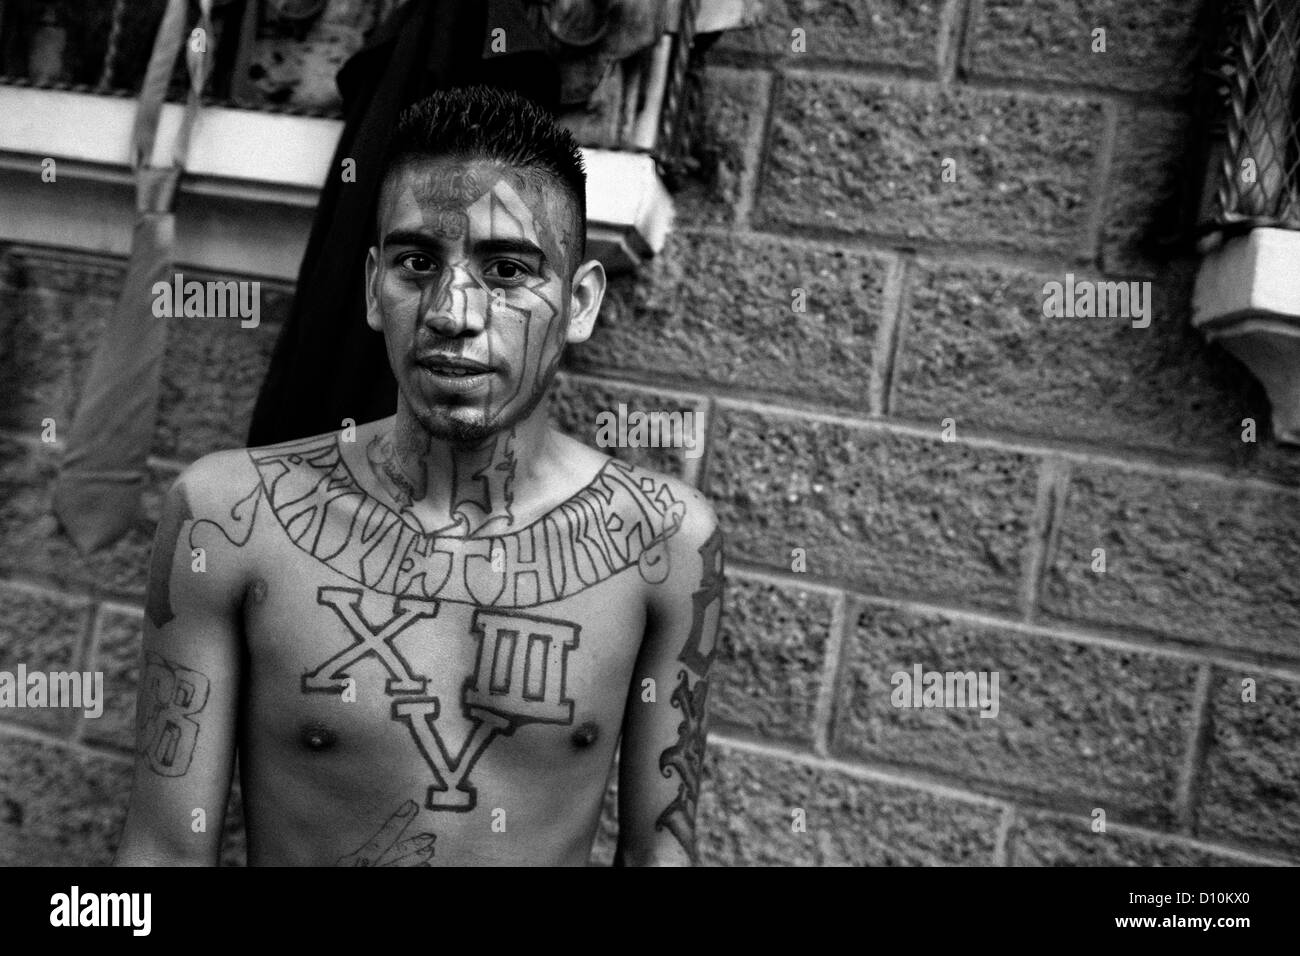 A former member of the 18th Street Gang (M-18) shows off his gang tattoos on the street in San Salvador, El Salvador. Stock Photo